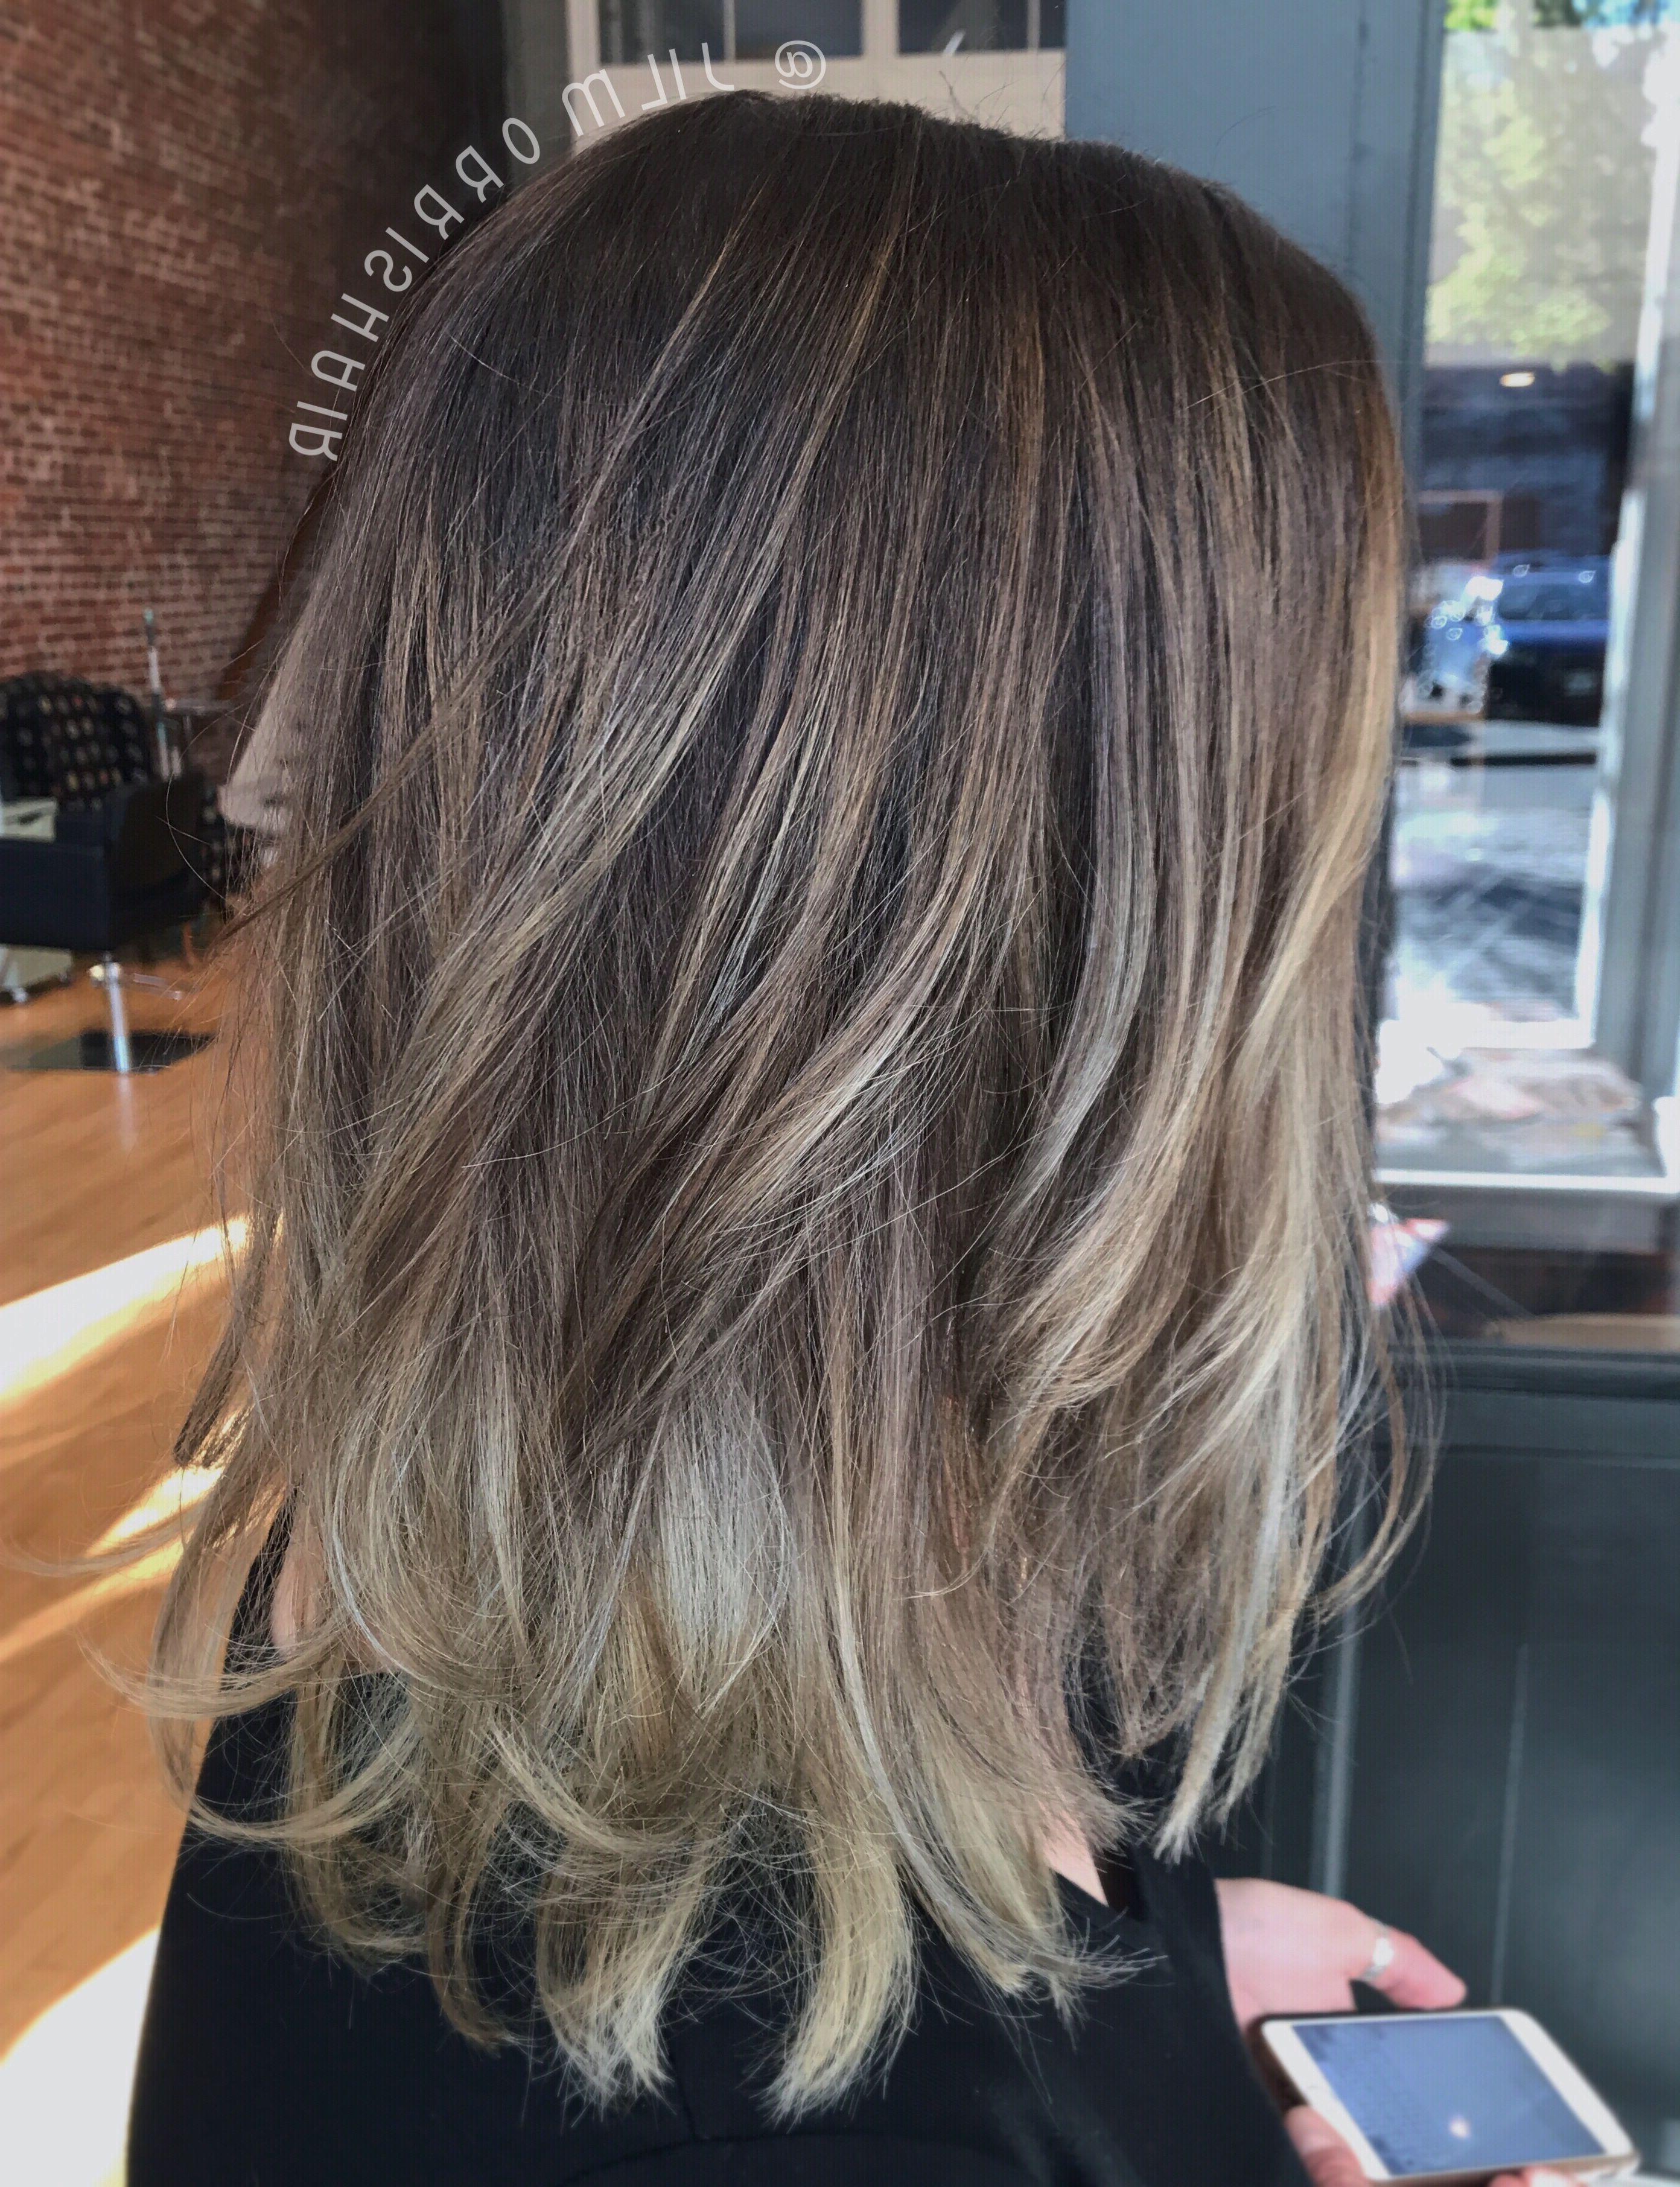 Dark Ash Blonde Sombré, Balayage Highlights With Rooty Lowlights Intended For Most Up To Date Subtle Dirty Blonde Angled Bob Hairstyles (View 4 of 20)